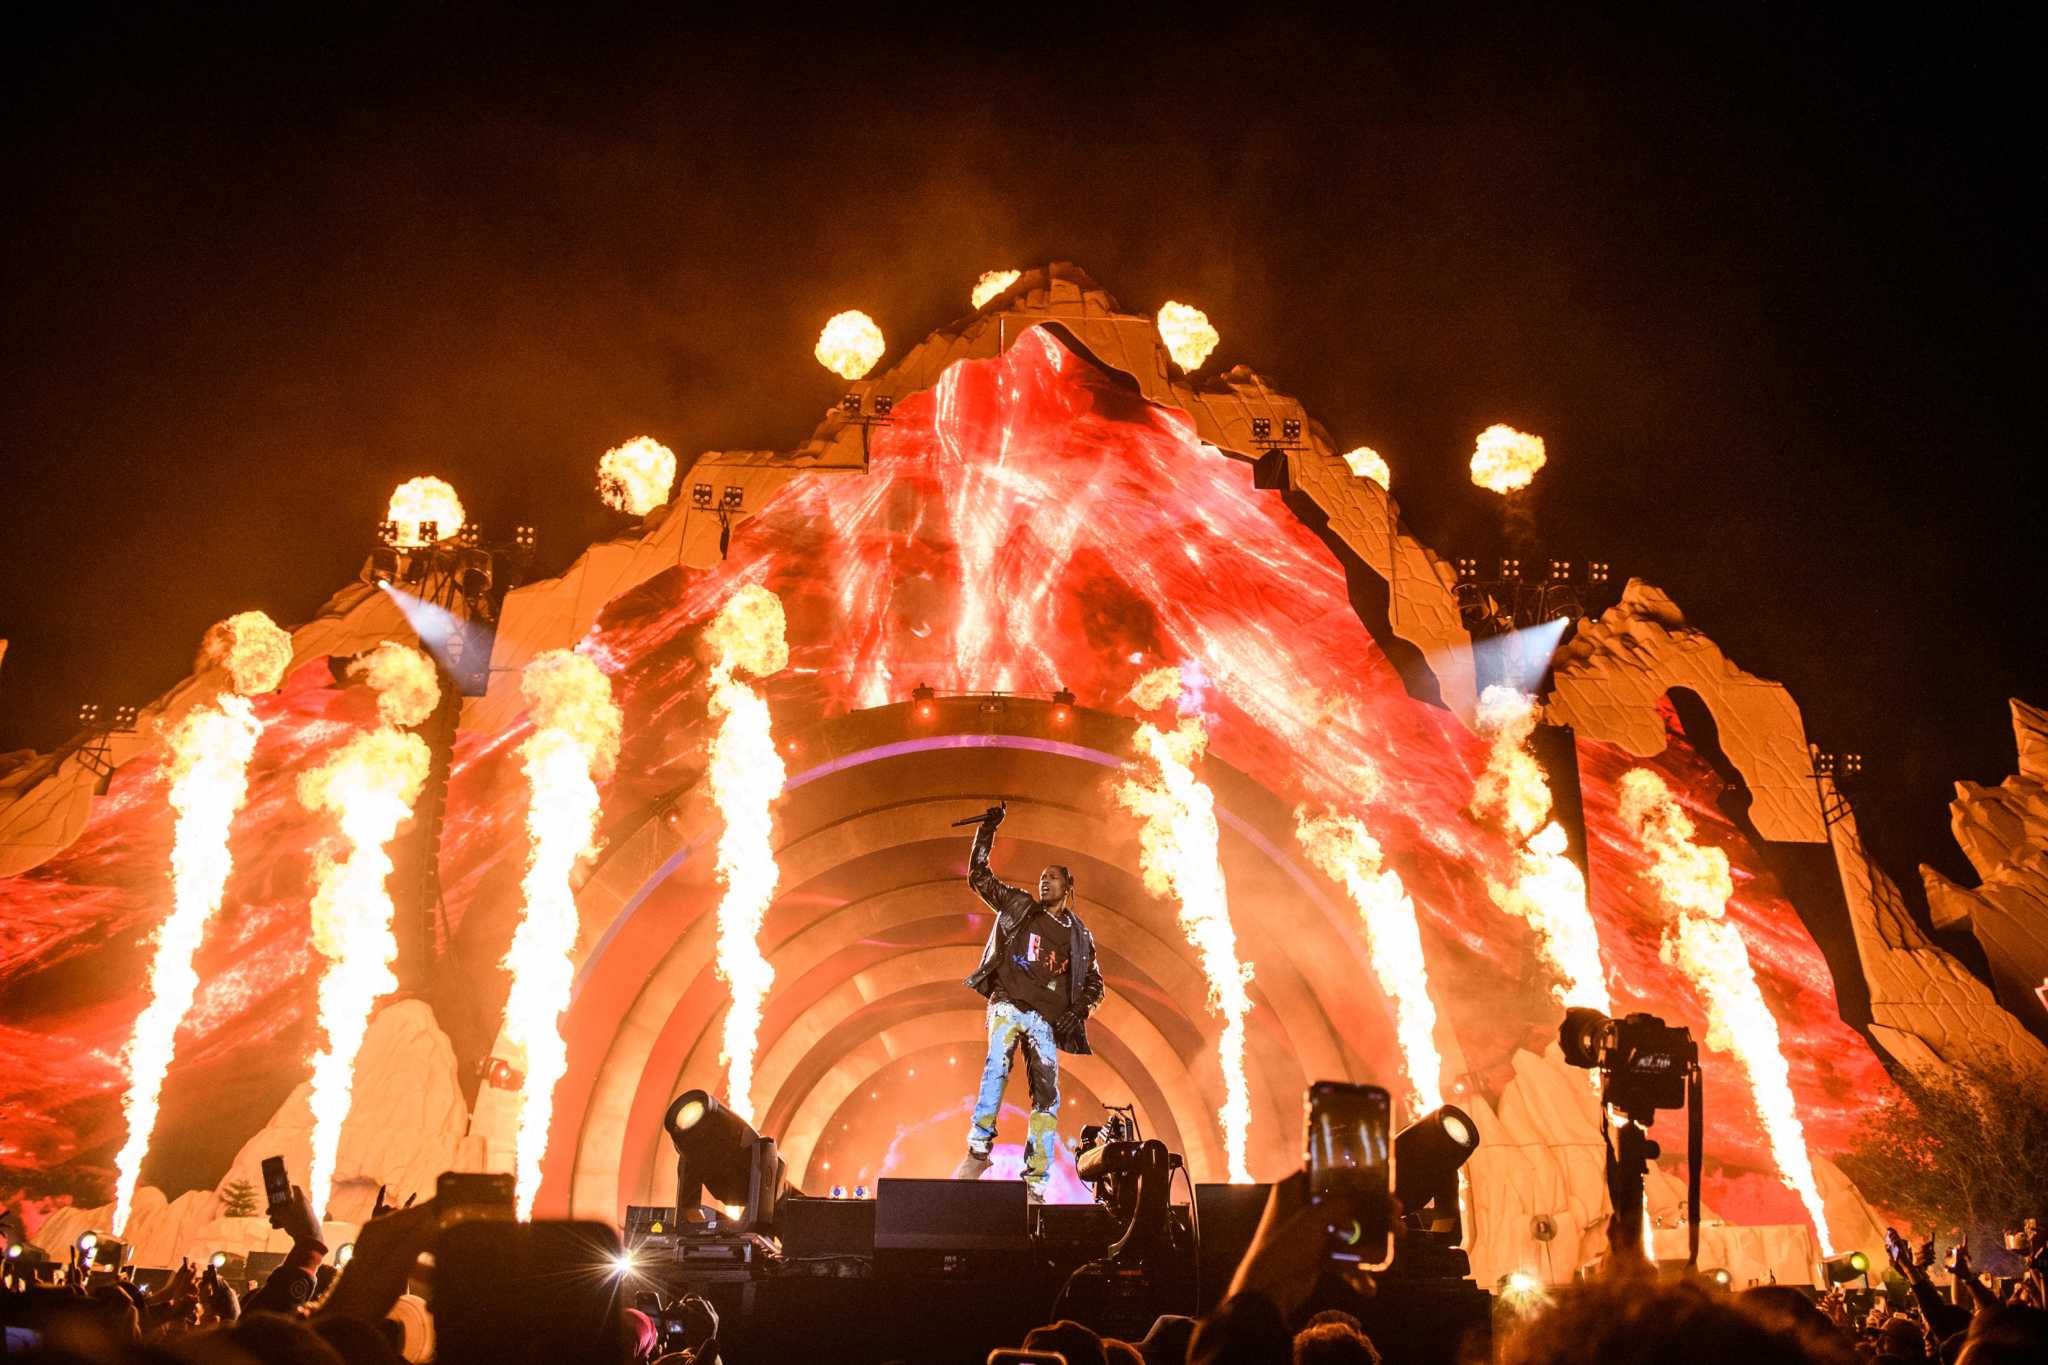 Astroworld Festival tragedy: Travis Scott&#39;s culture of devotion, chaos  turned deadly